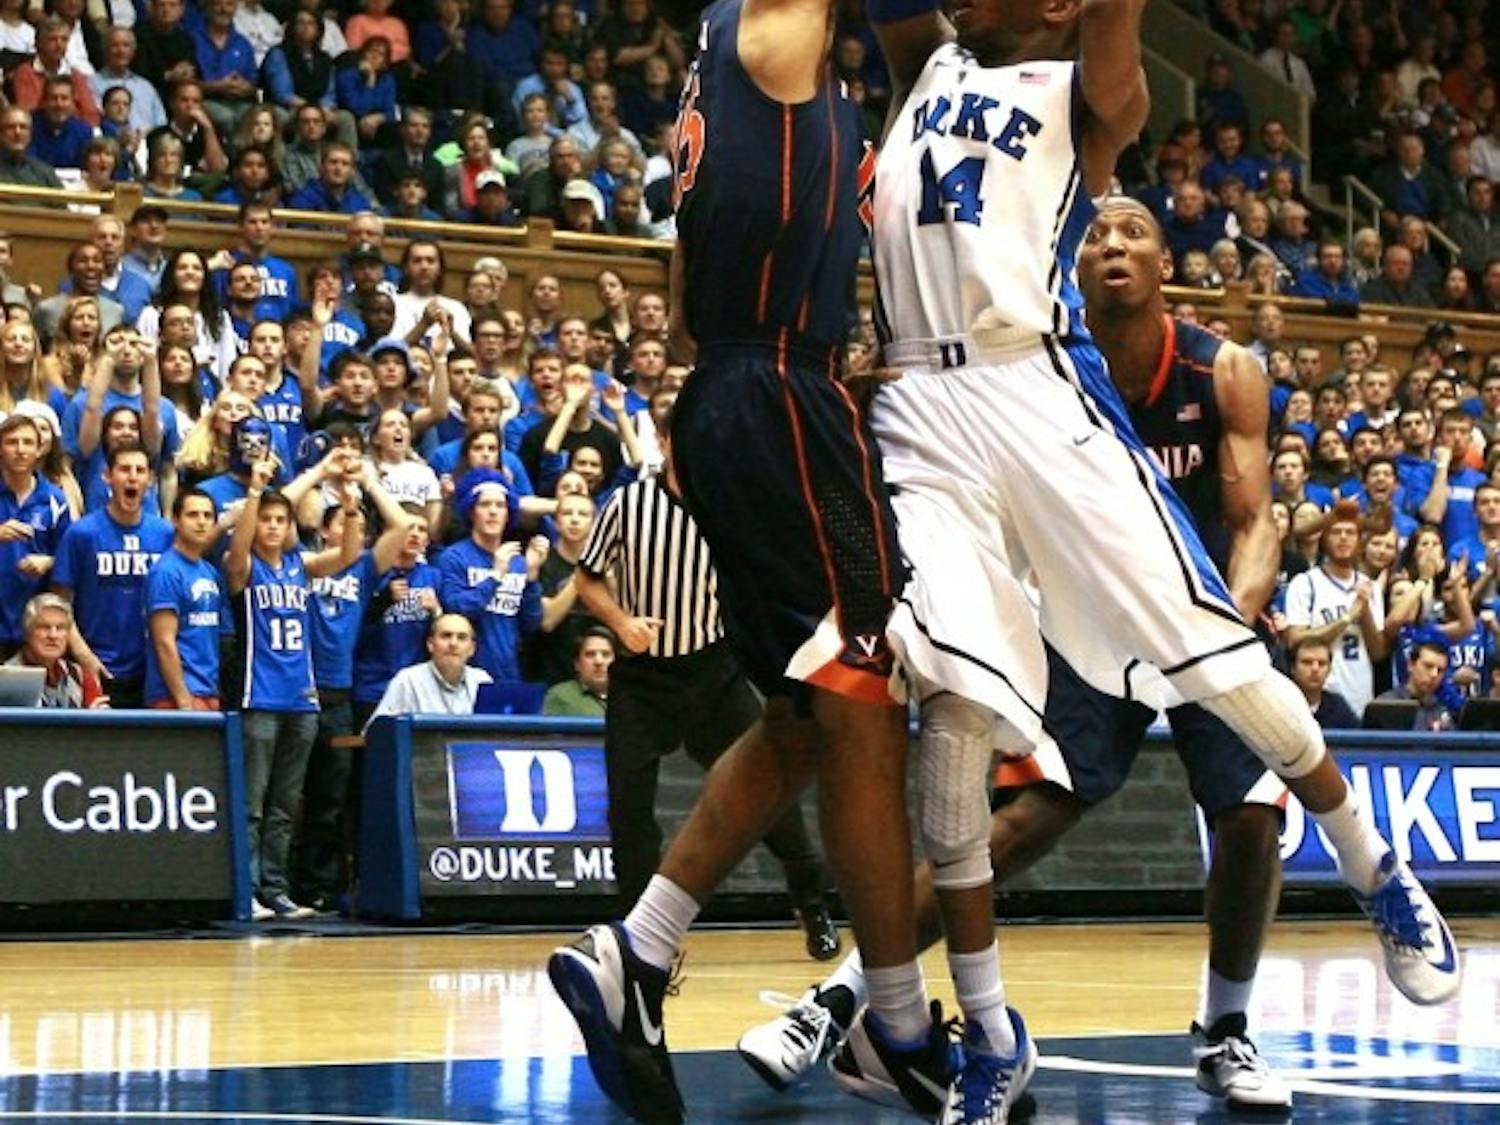 Duke upended Virginia 69-65 at Cameron indoor Stadium to hand the Cavaliers their first loss of conference play. Sulaimon's shot from the left corner with 13.5 seconds to play bounced off the iron and bounded high in the air before finding the bottom of the net to give the Blue Devils their go ahead score.